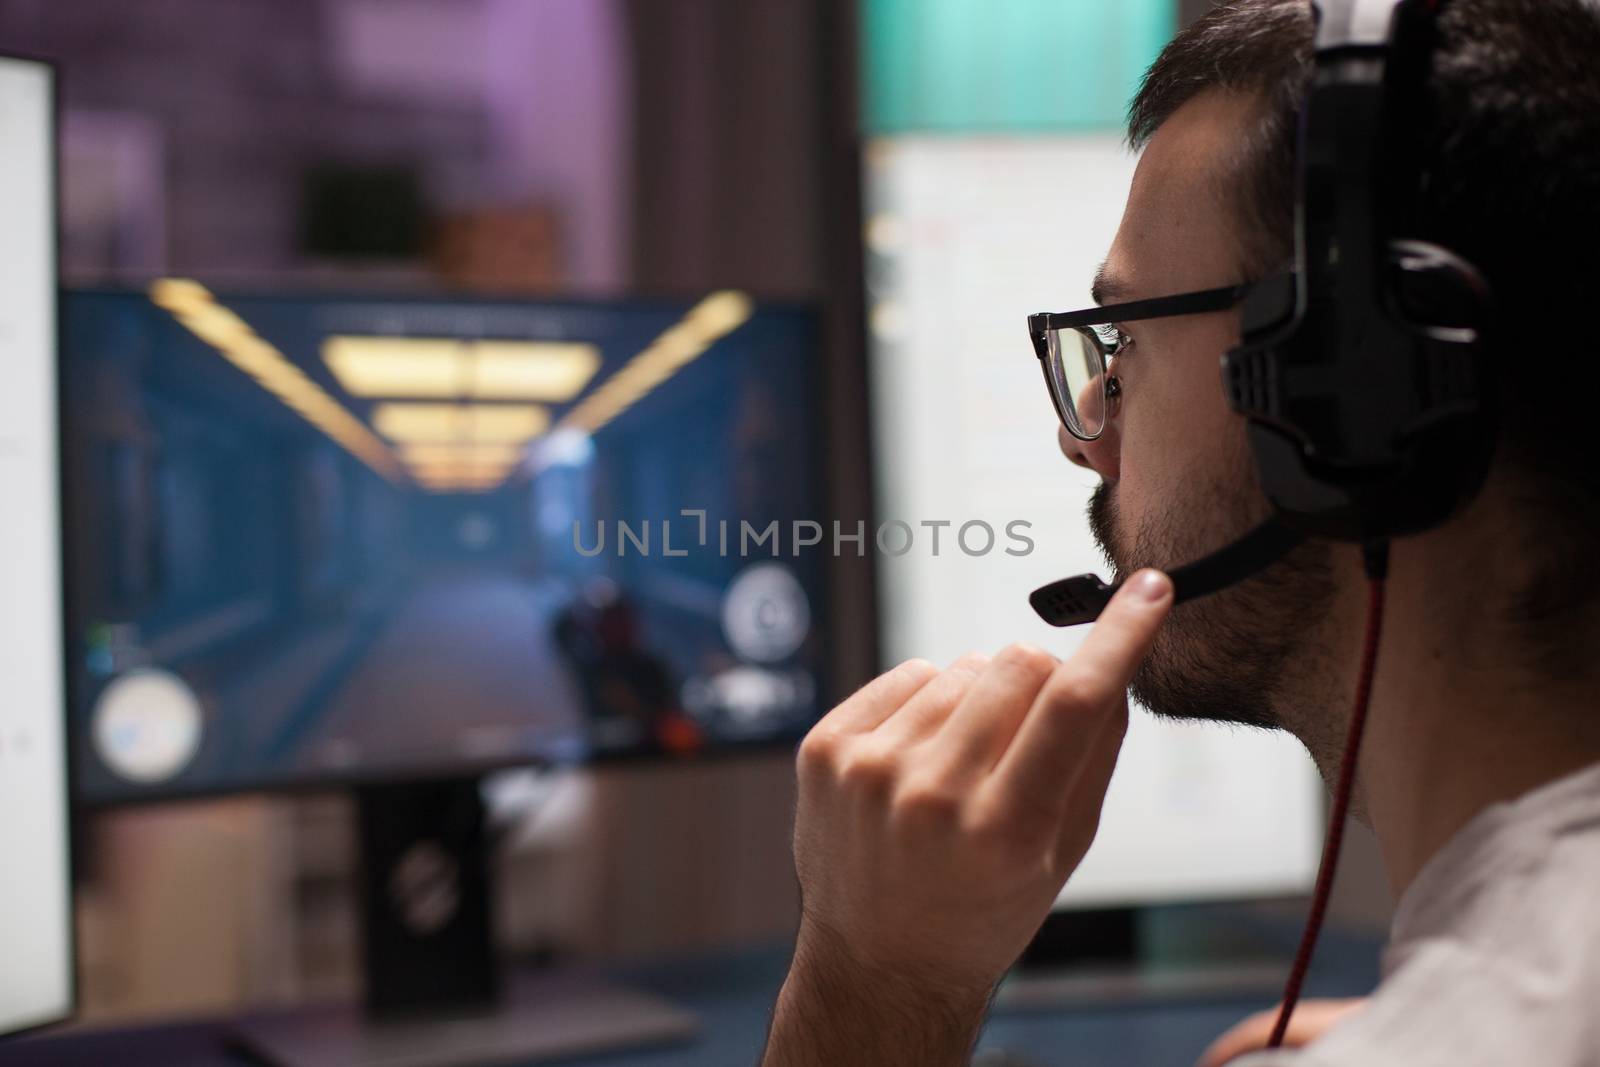 Competitive young man playing shooter video games wearing headphones in a room with neon light.